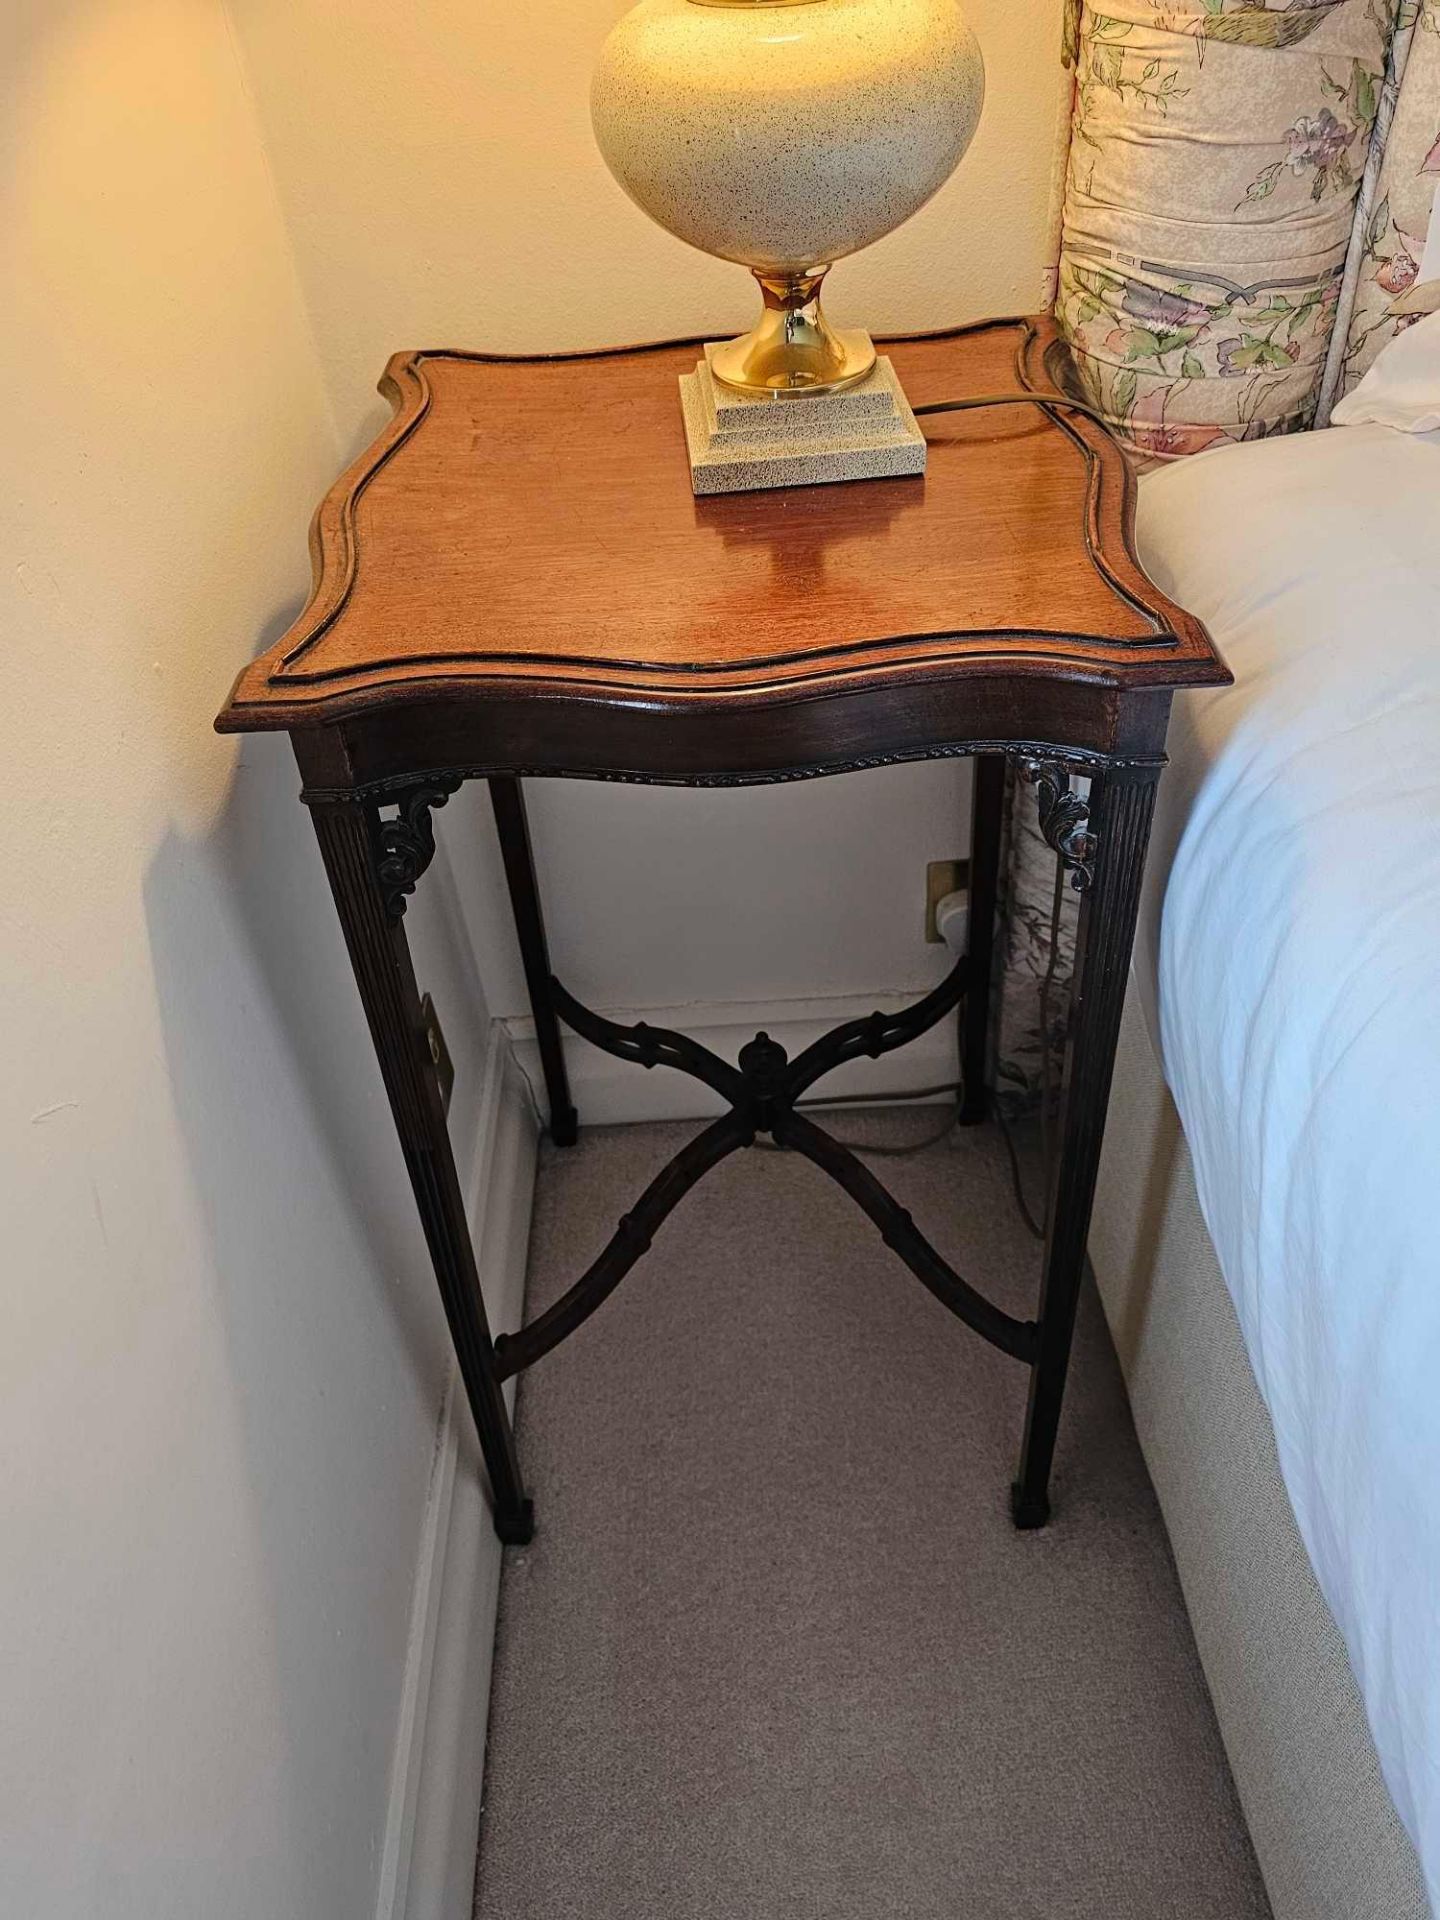 A George III Style Mahogany End Table The Serpentine Sided Top On Slender Fluted Square Legs - Image 3 of 4